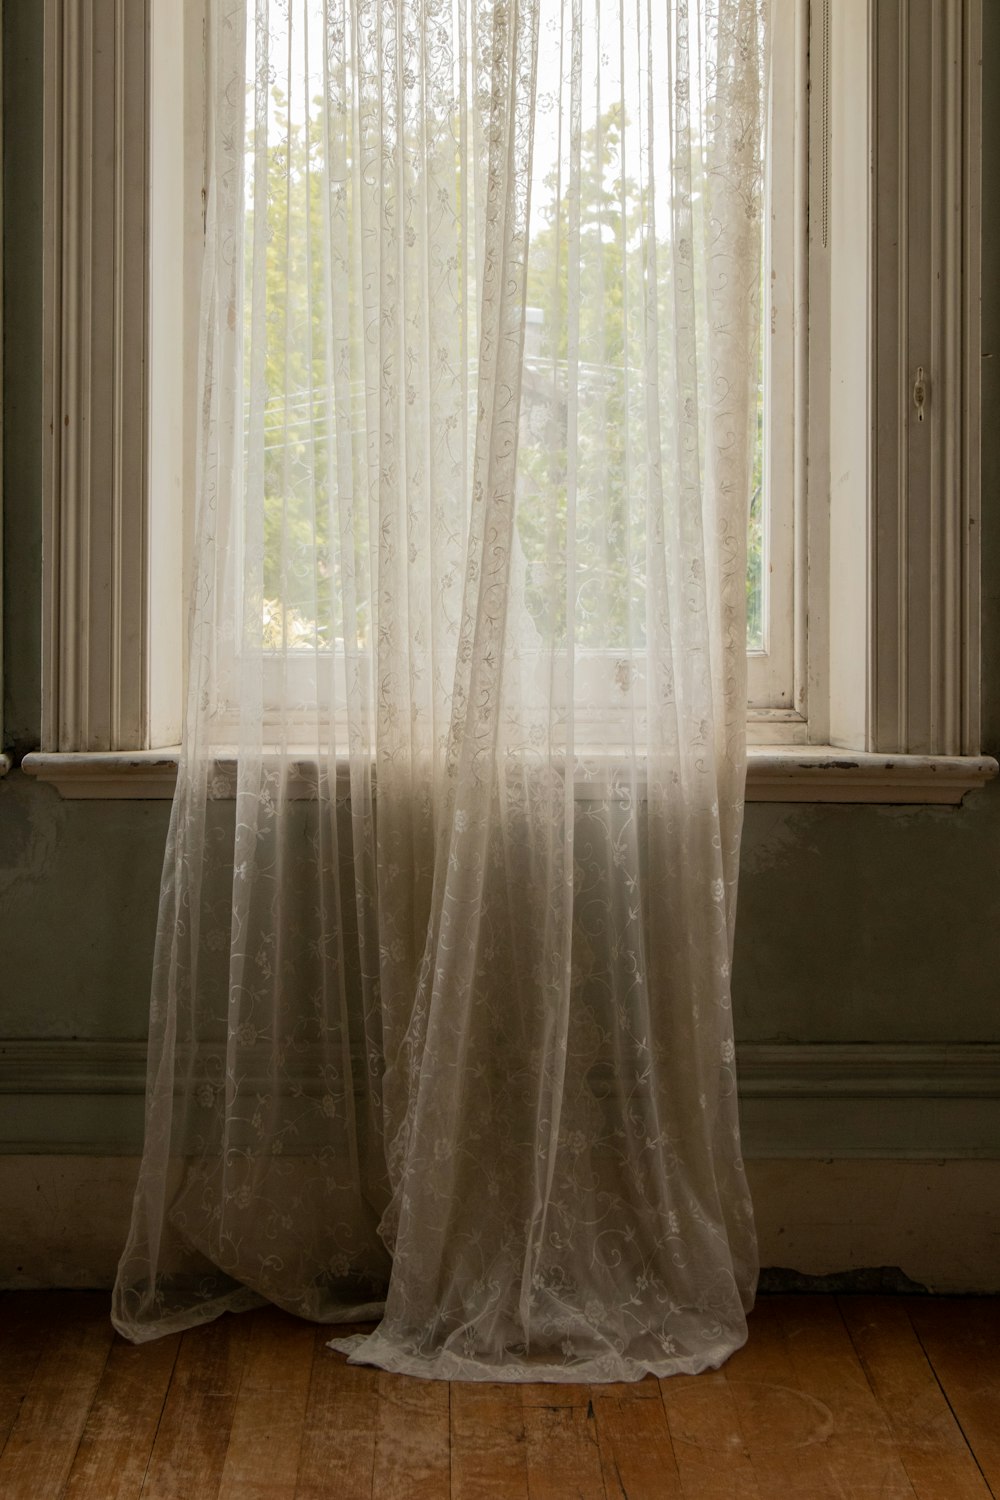 Window Curtains Pictures | Download Free Images on Unsplash